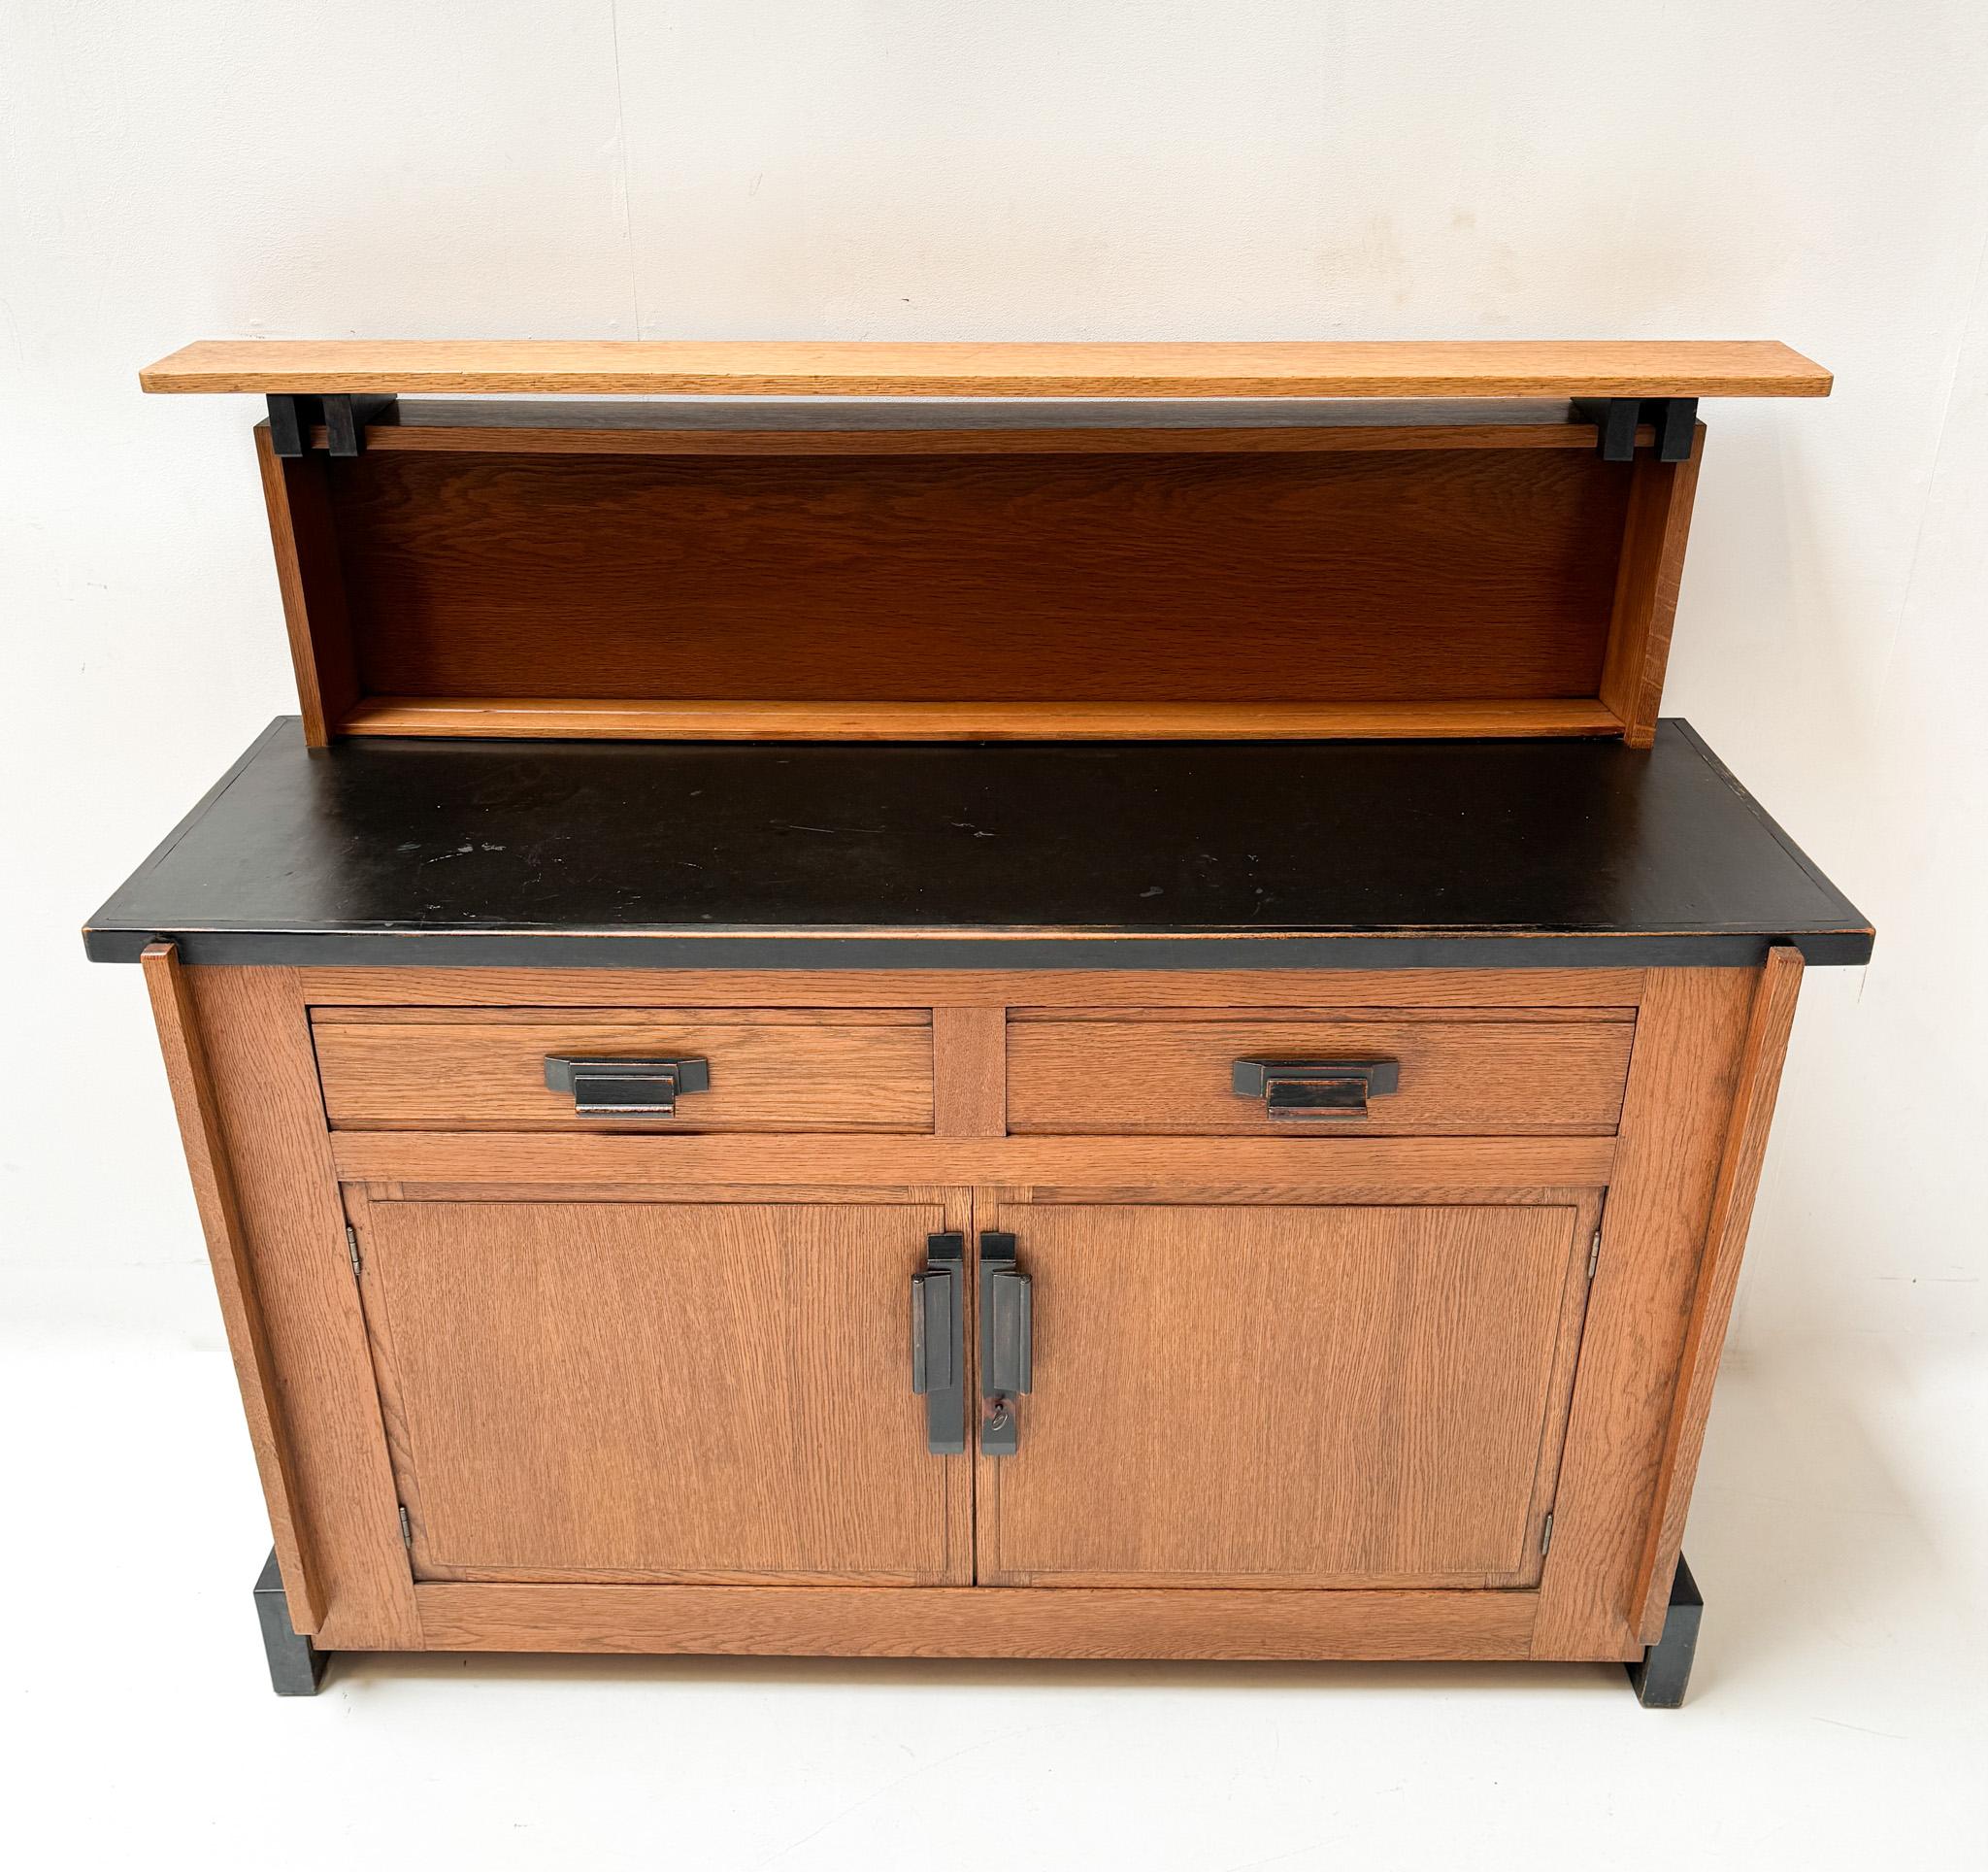 Magnificent and ultra rare Art Deco Modernist credenza or sideboard.
Design by Jan Brunott.
Striking Dutch design from the 1920s.
Solid oak base with original black lacquered handles on both doors and drawers.
Original black lacquered linoleum